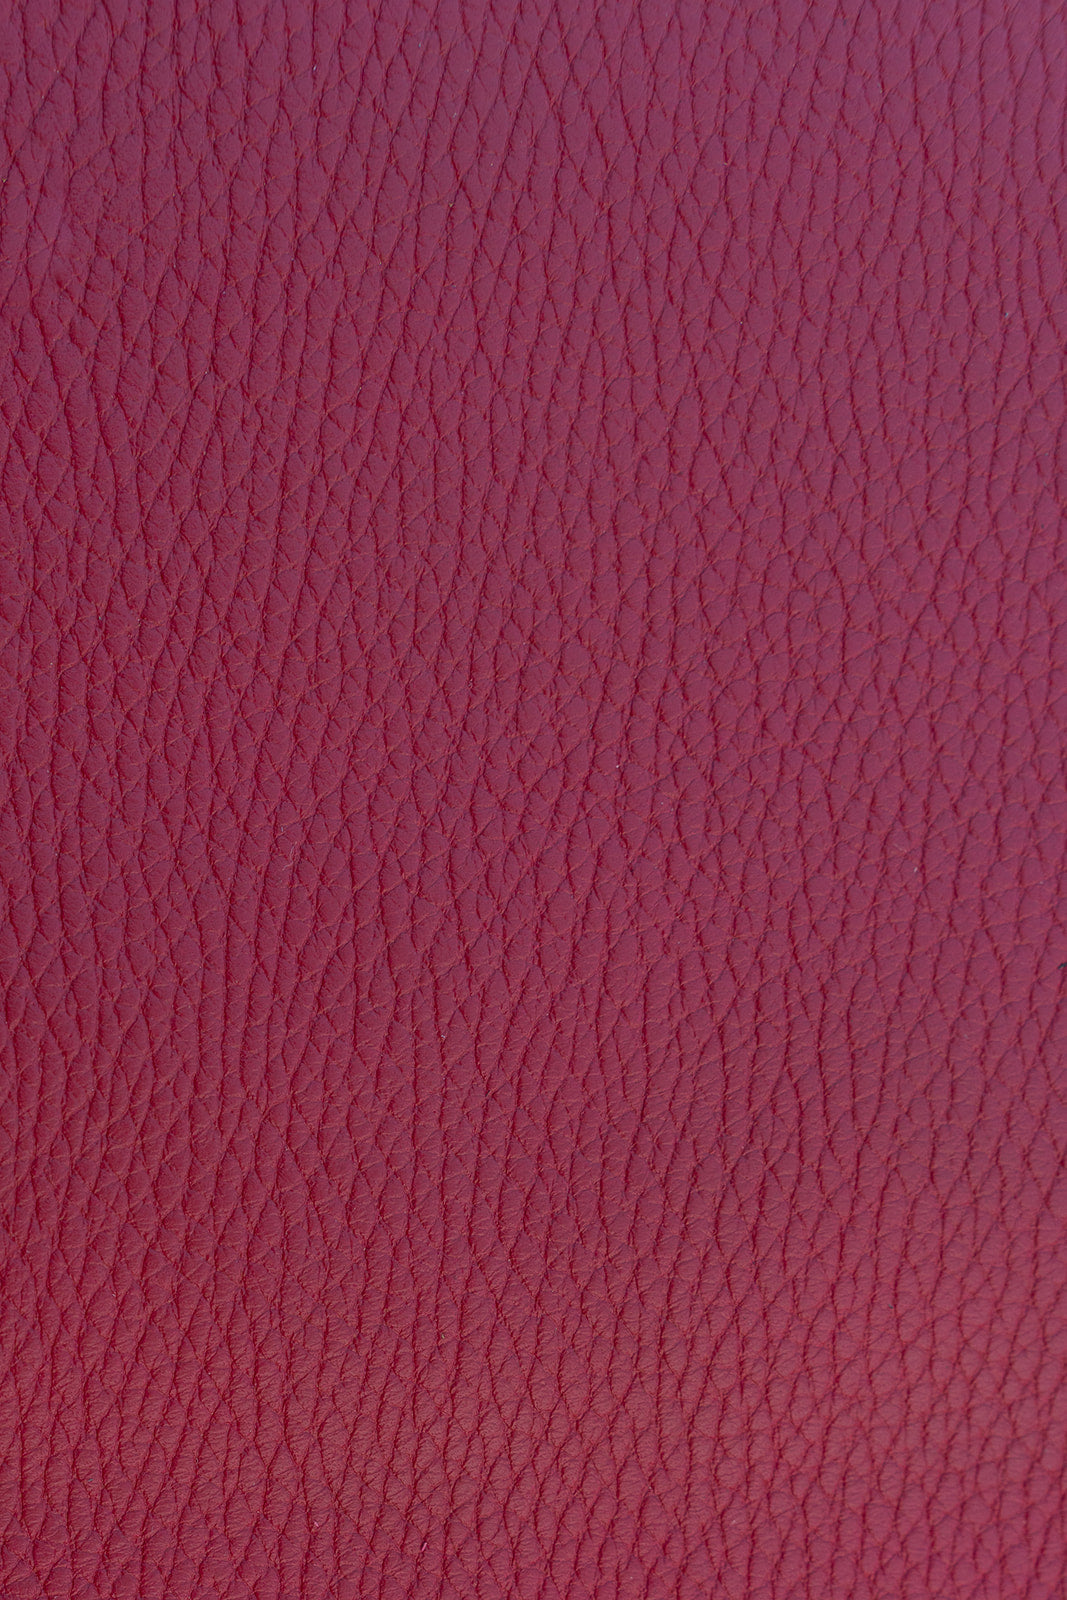 JL wallet leather - Berry red